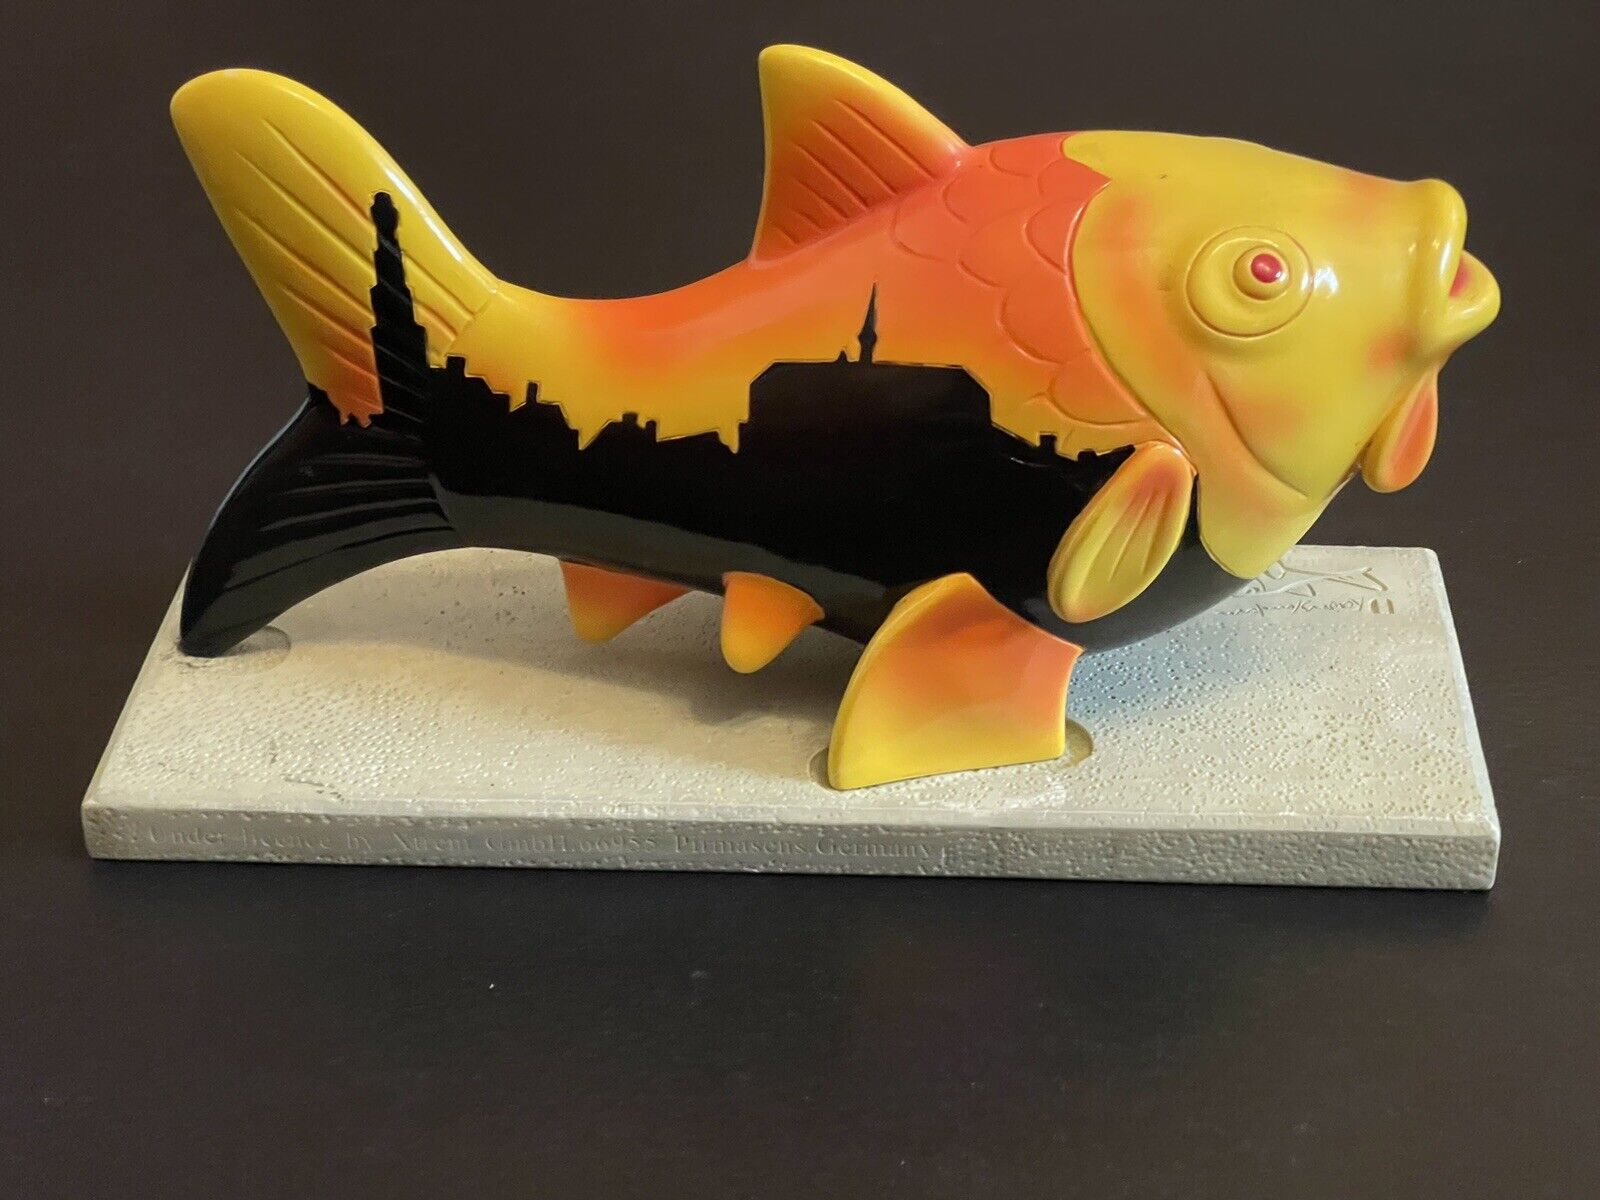 Porcelain fish sculpture from Pirmasens, Germany Art in the City Extrem Company